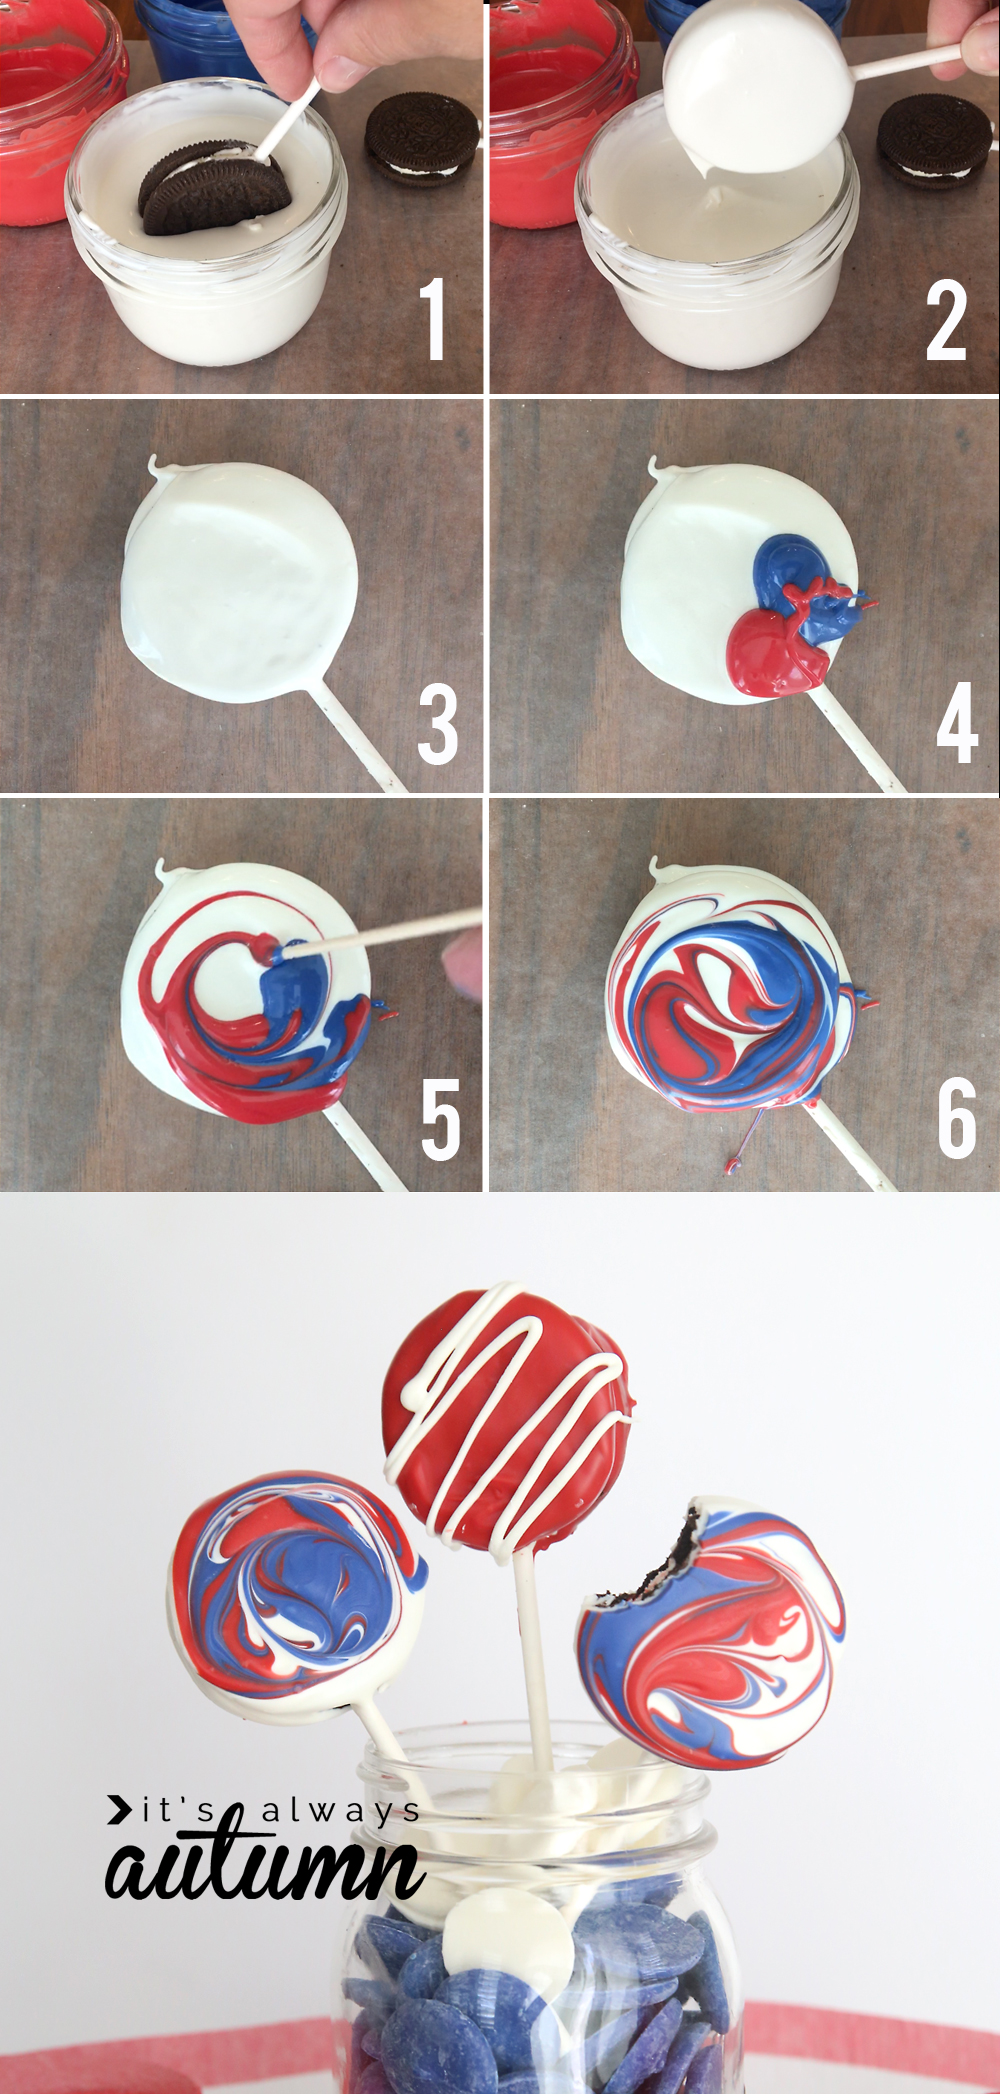 Steps to decorating a red white and blue Oreo pop for 4th of July